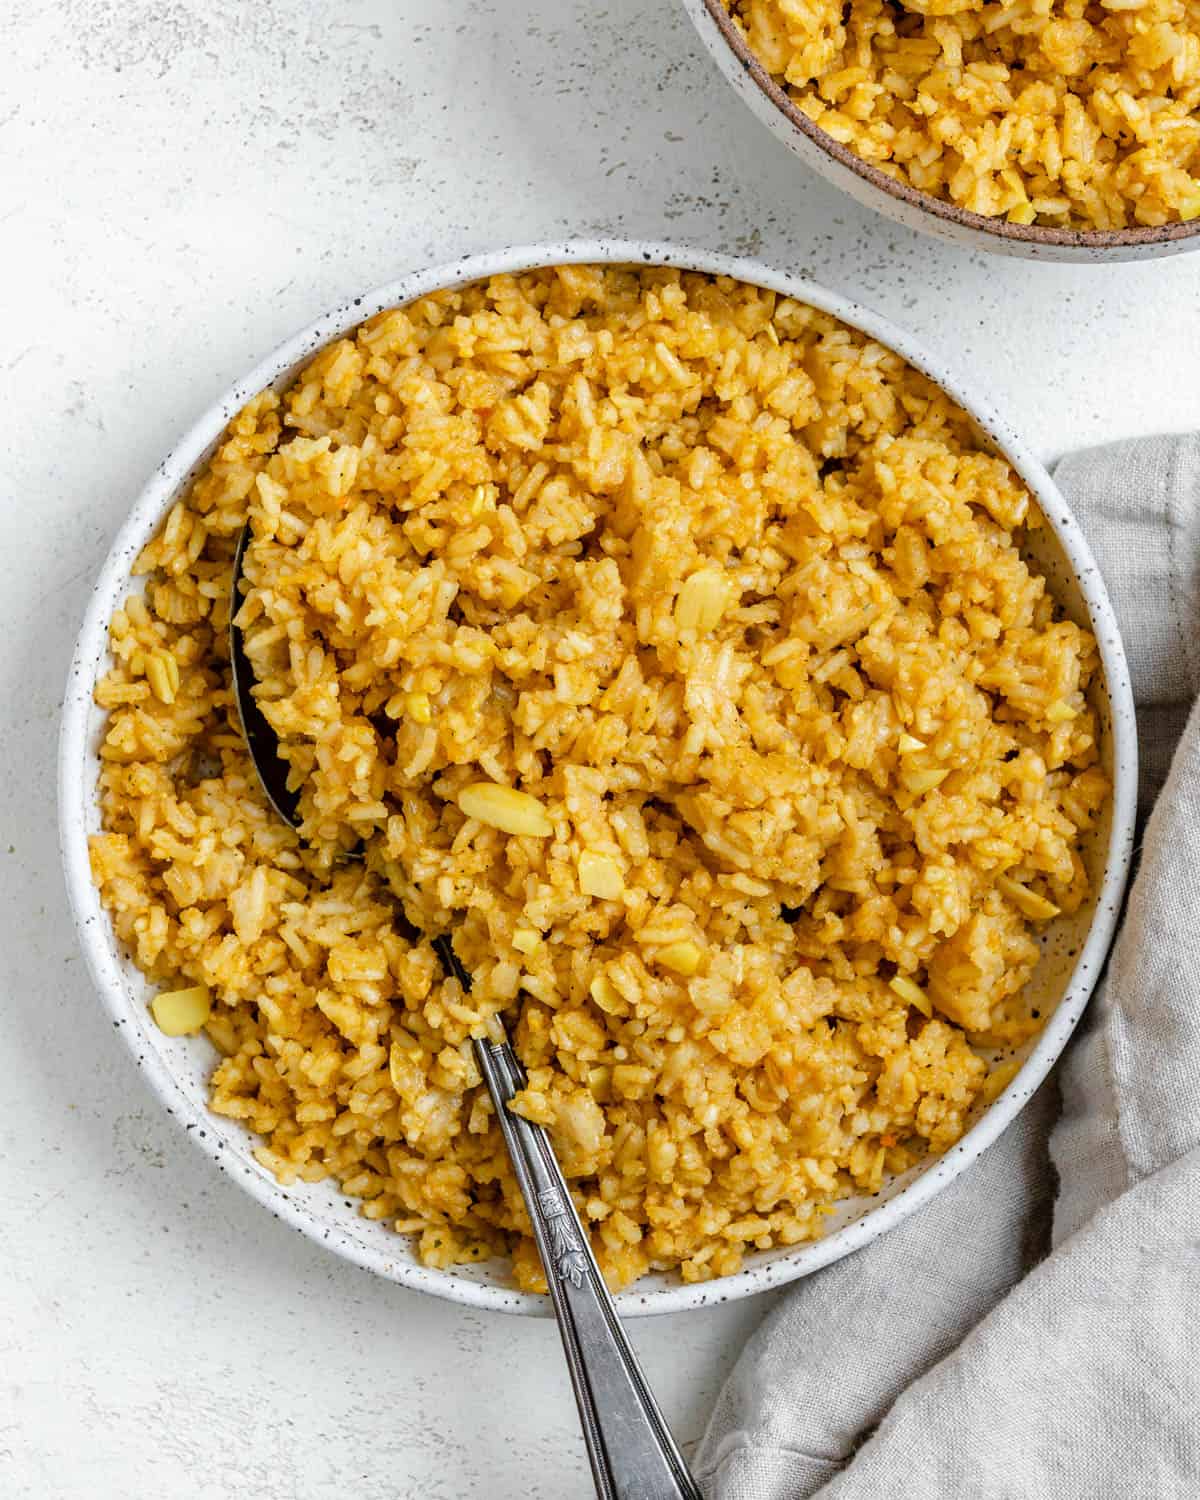 completed Garlic Rice [Spanish Yellow Rice] in a white bowl against a white background